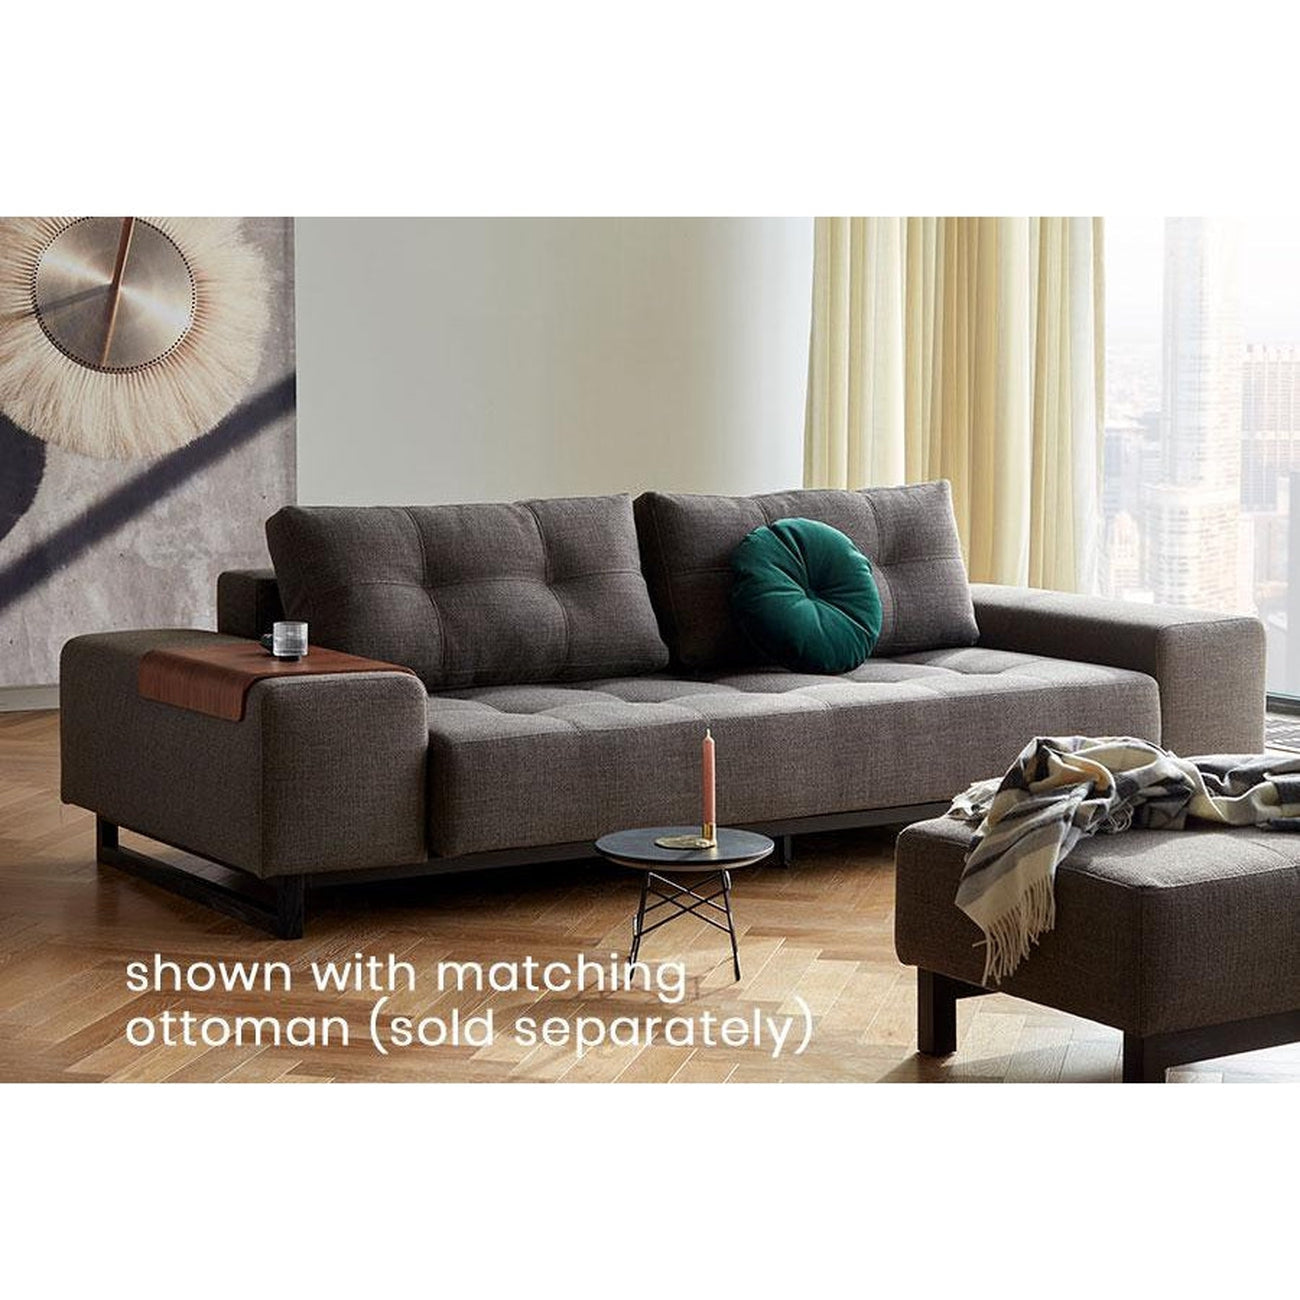 Grand D.E.L sofa BLACK WOOD (QUEEN)-Innovation Living-INNO-94-748190527-3-SofasMixed Dance Natural-5-France and Son